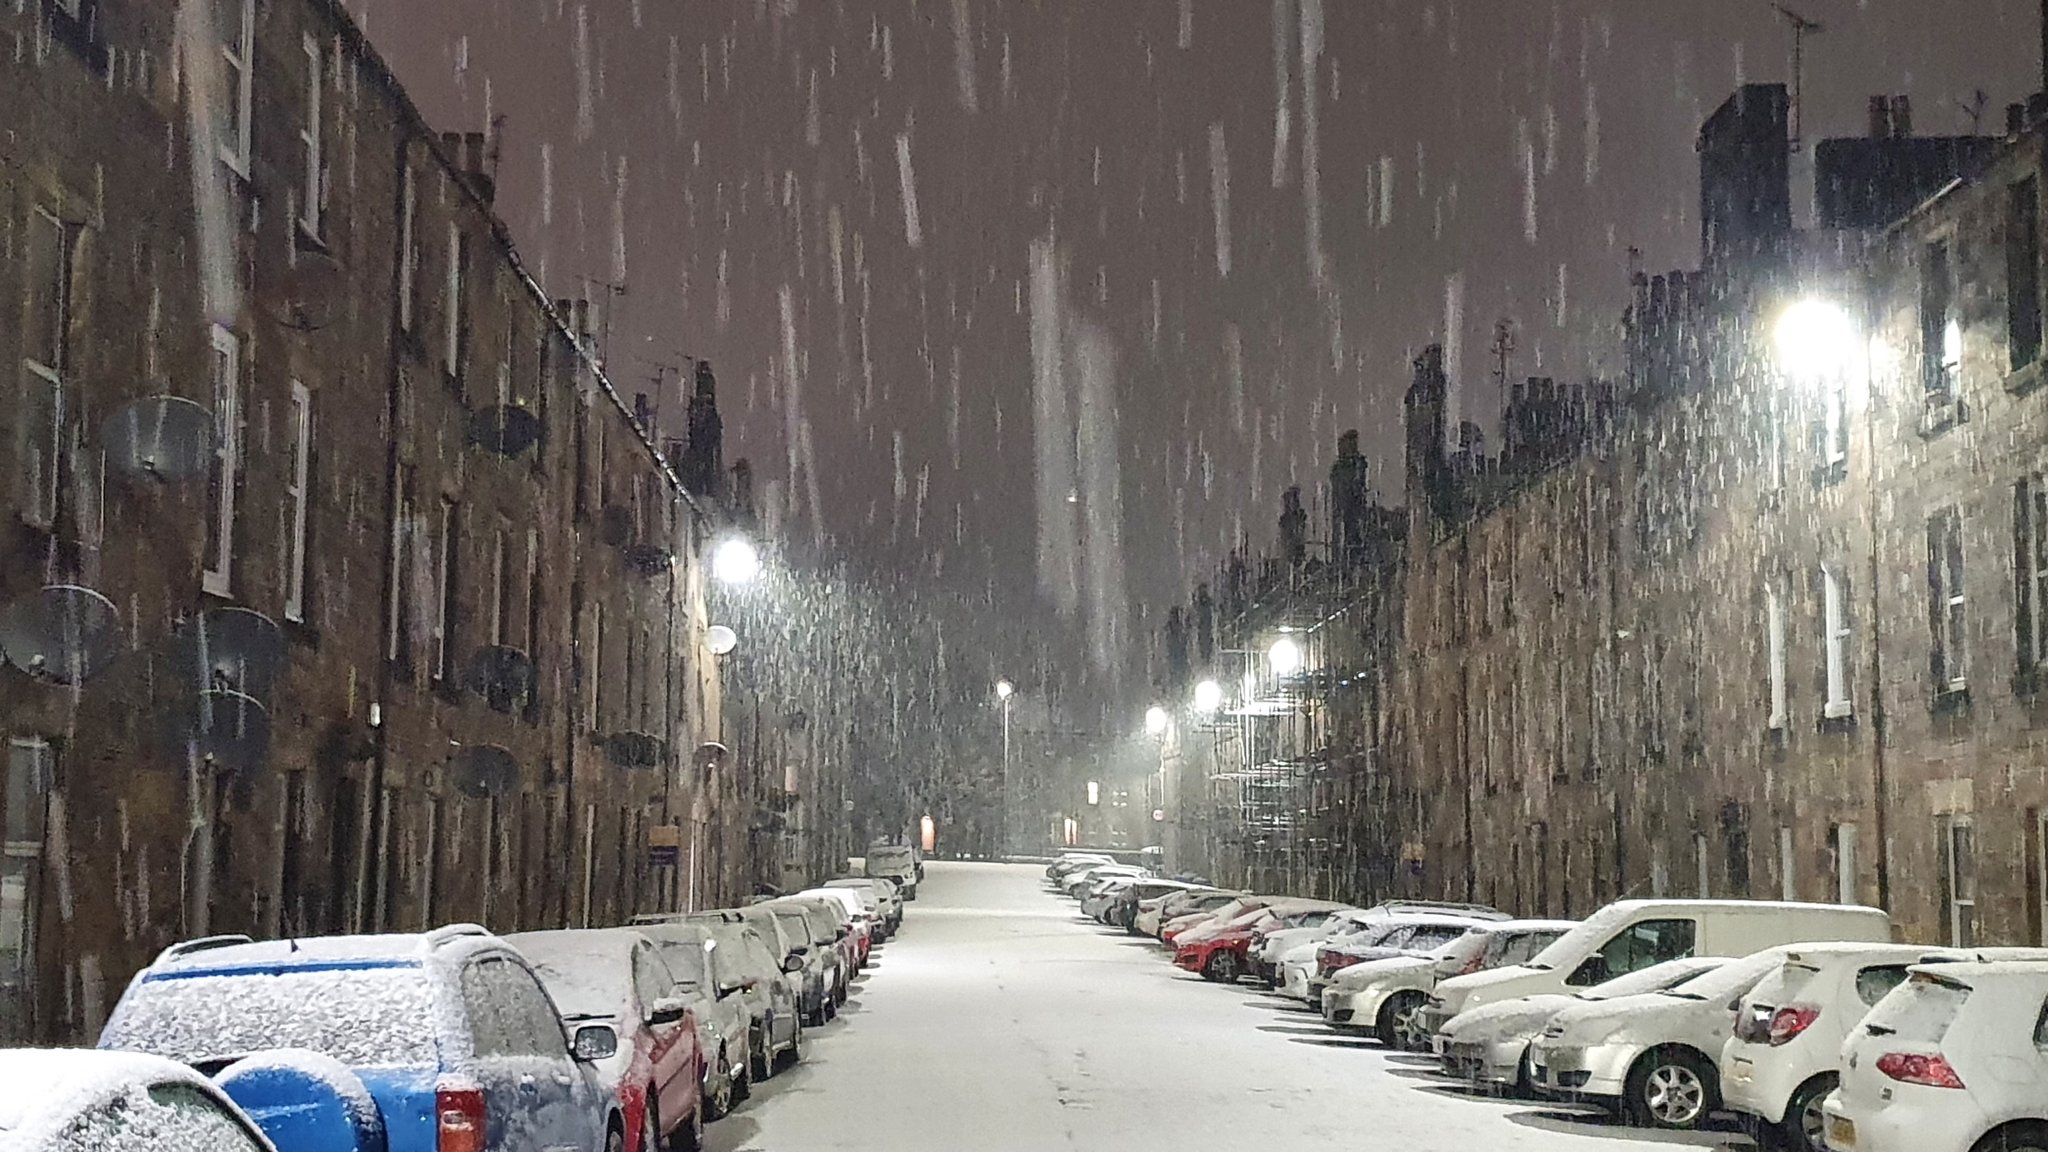 2nd Place Snow shower at night in the streets of Stirling, Scotland by Graham Fraser @frasergj